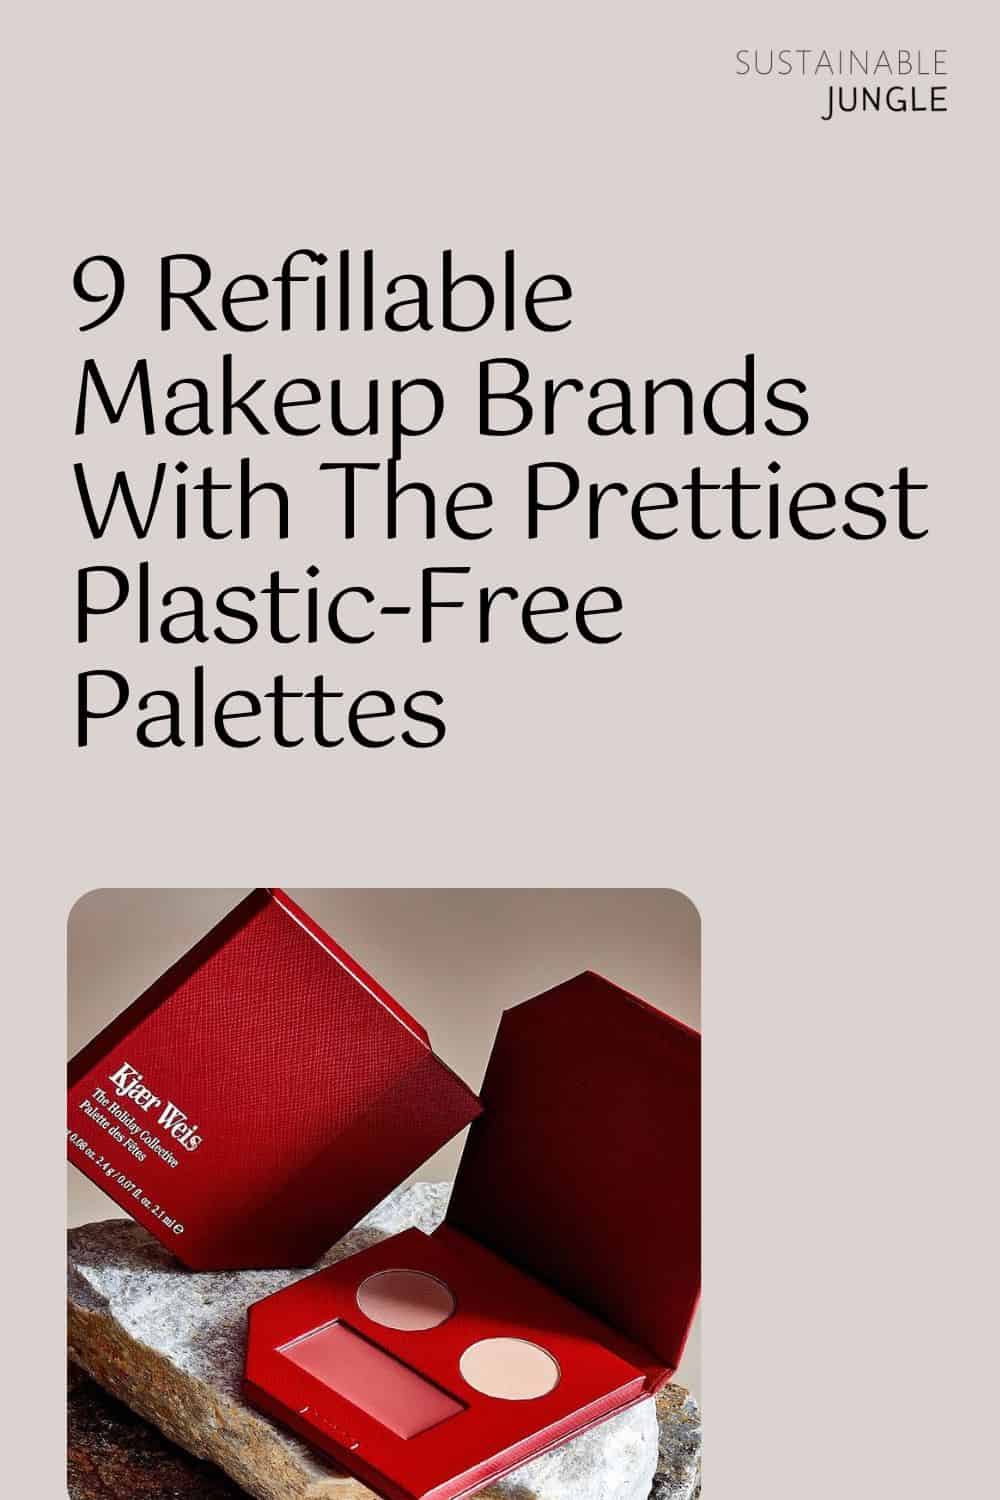 9 Refillable Makeup Brands With The Prettiest Plastic-Free Palettes Image by Kjaer Weis #refillablemakeup #bestrefillablemakeuppalettes #refillablemakeupbrands #makeuprefills #makeuppaletterefills #sustainablejungle